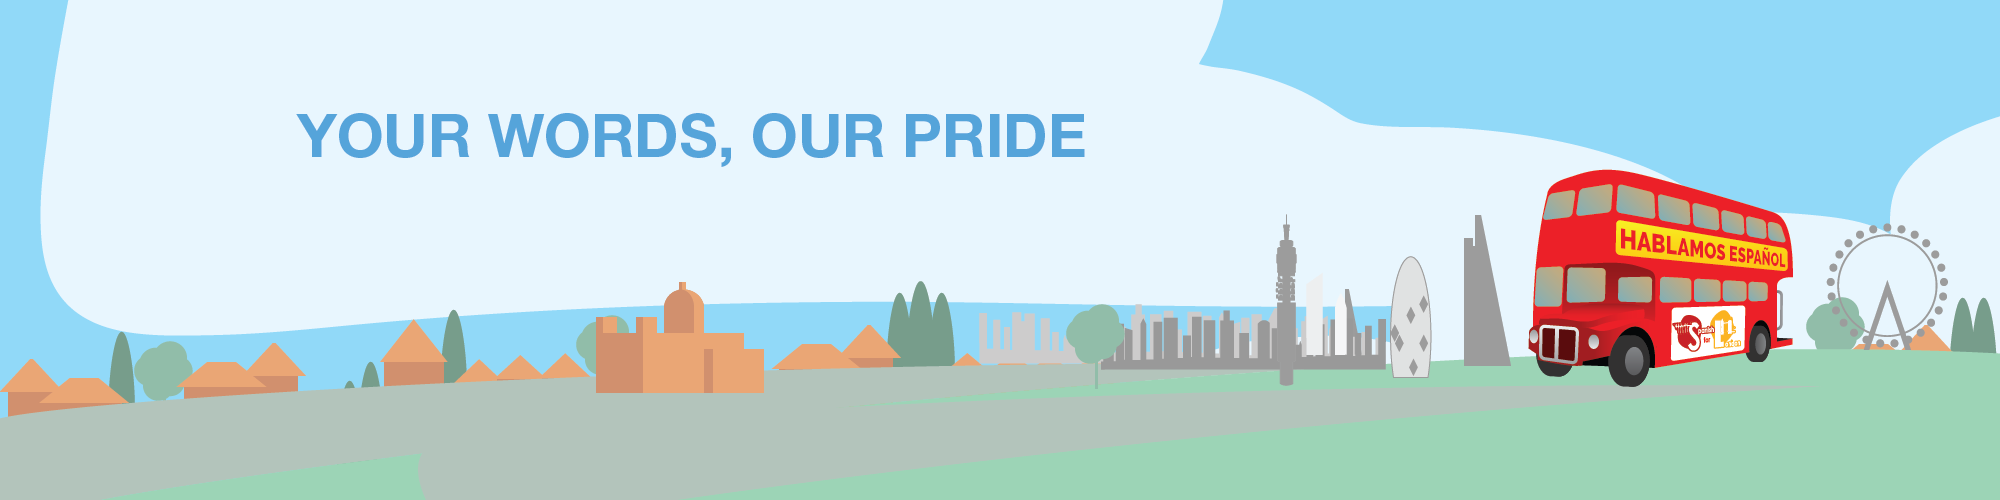 Your Words, Our Pride - Spanish for London